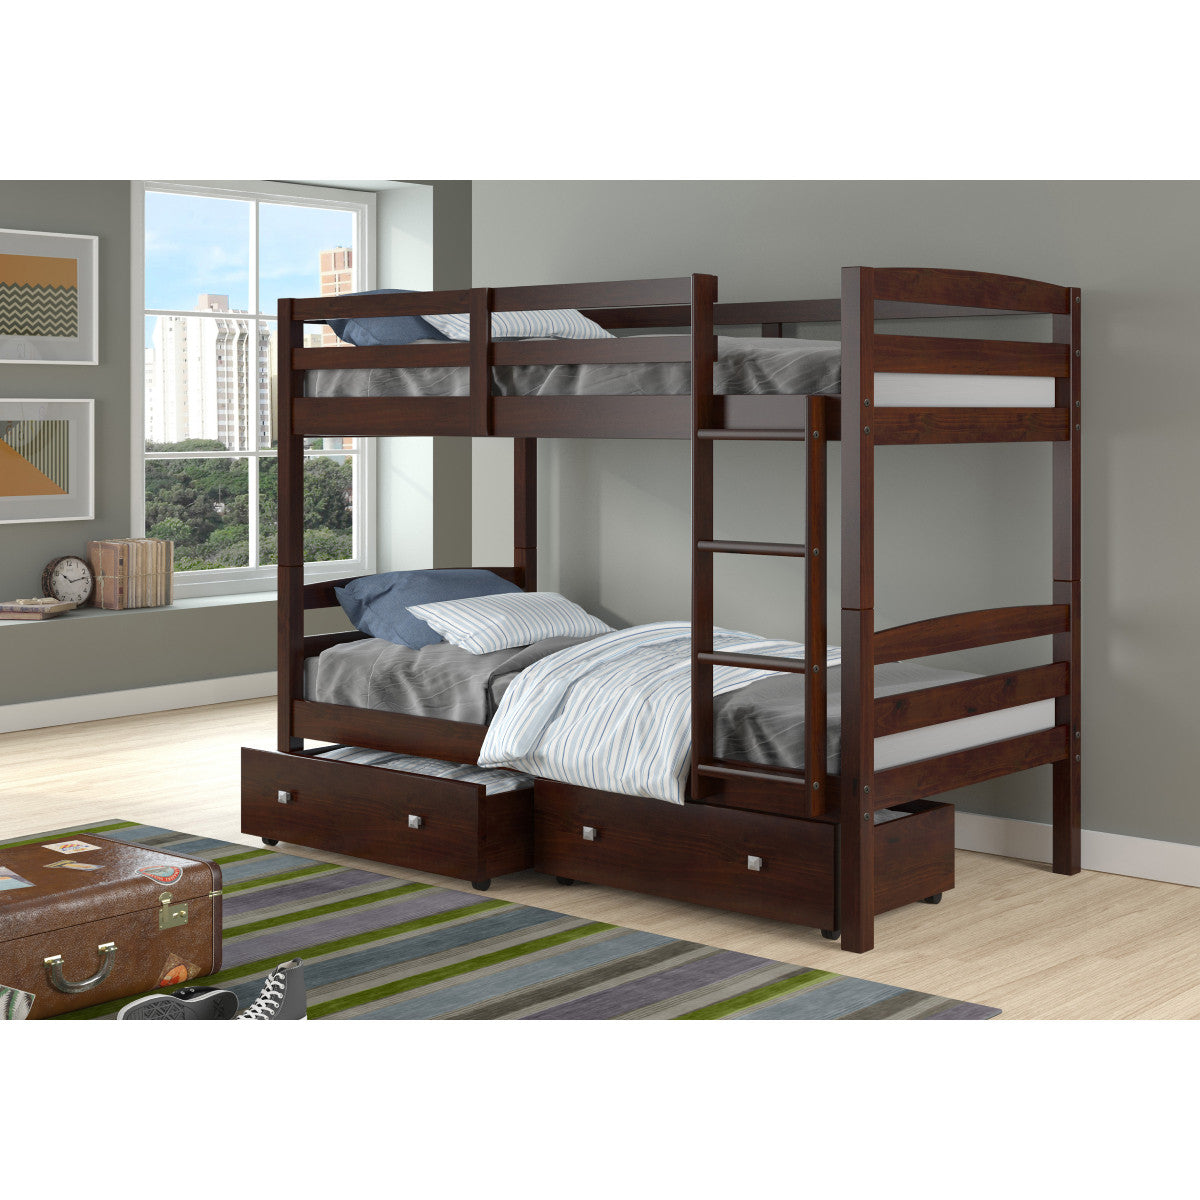 TWIN/TWIN DEVON BUNK BED WITH DUAL UNDERBED DRAWERS IN DARK CAPPUCCINO FINISH